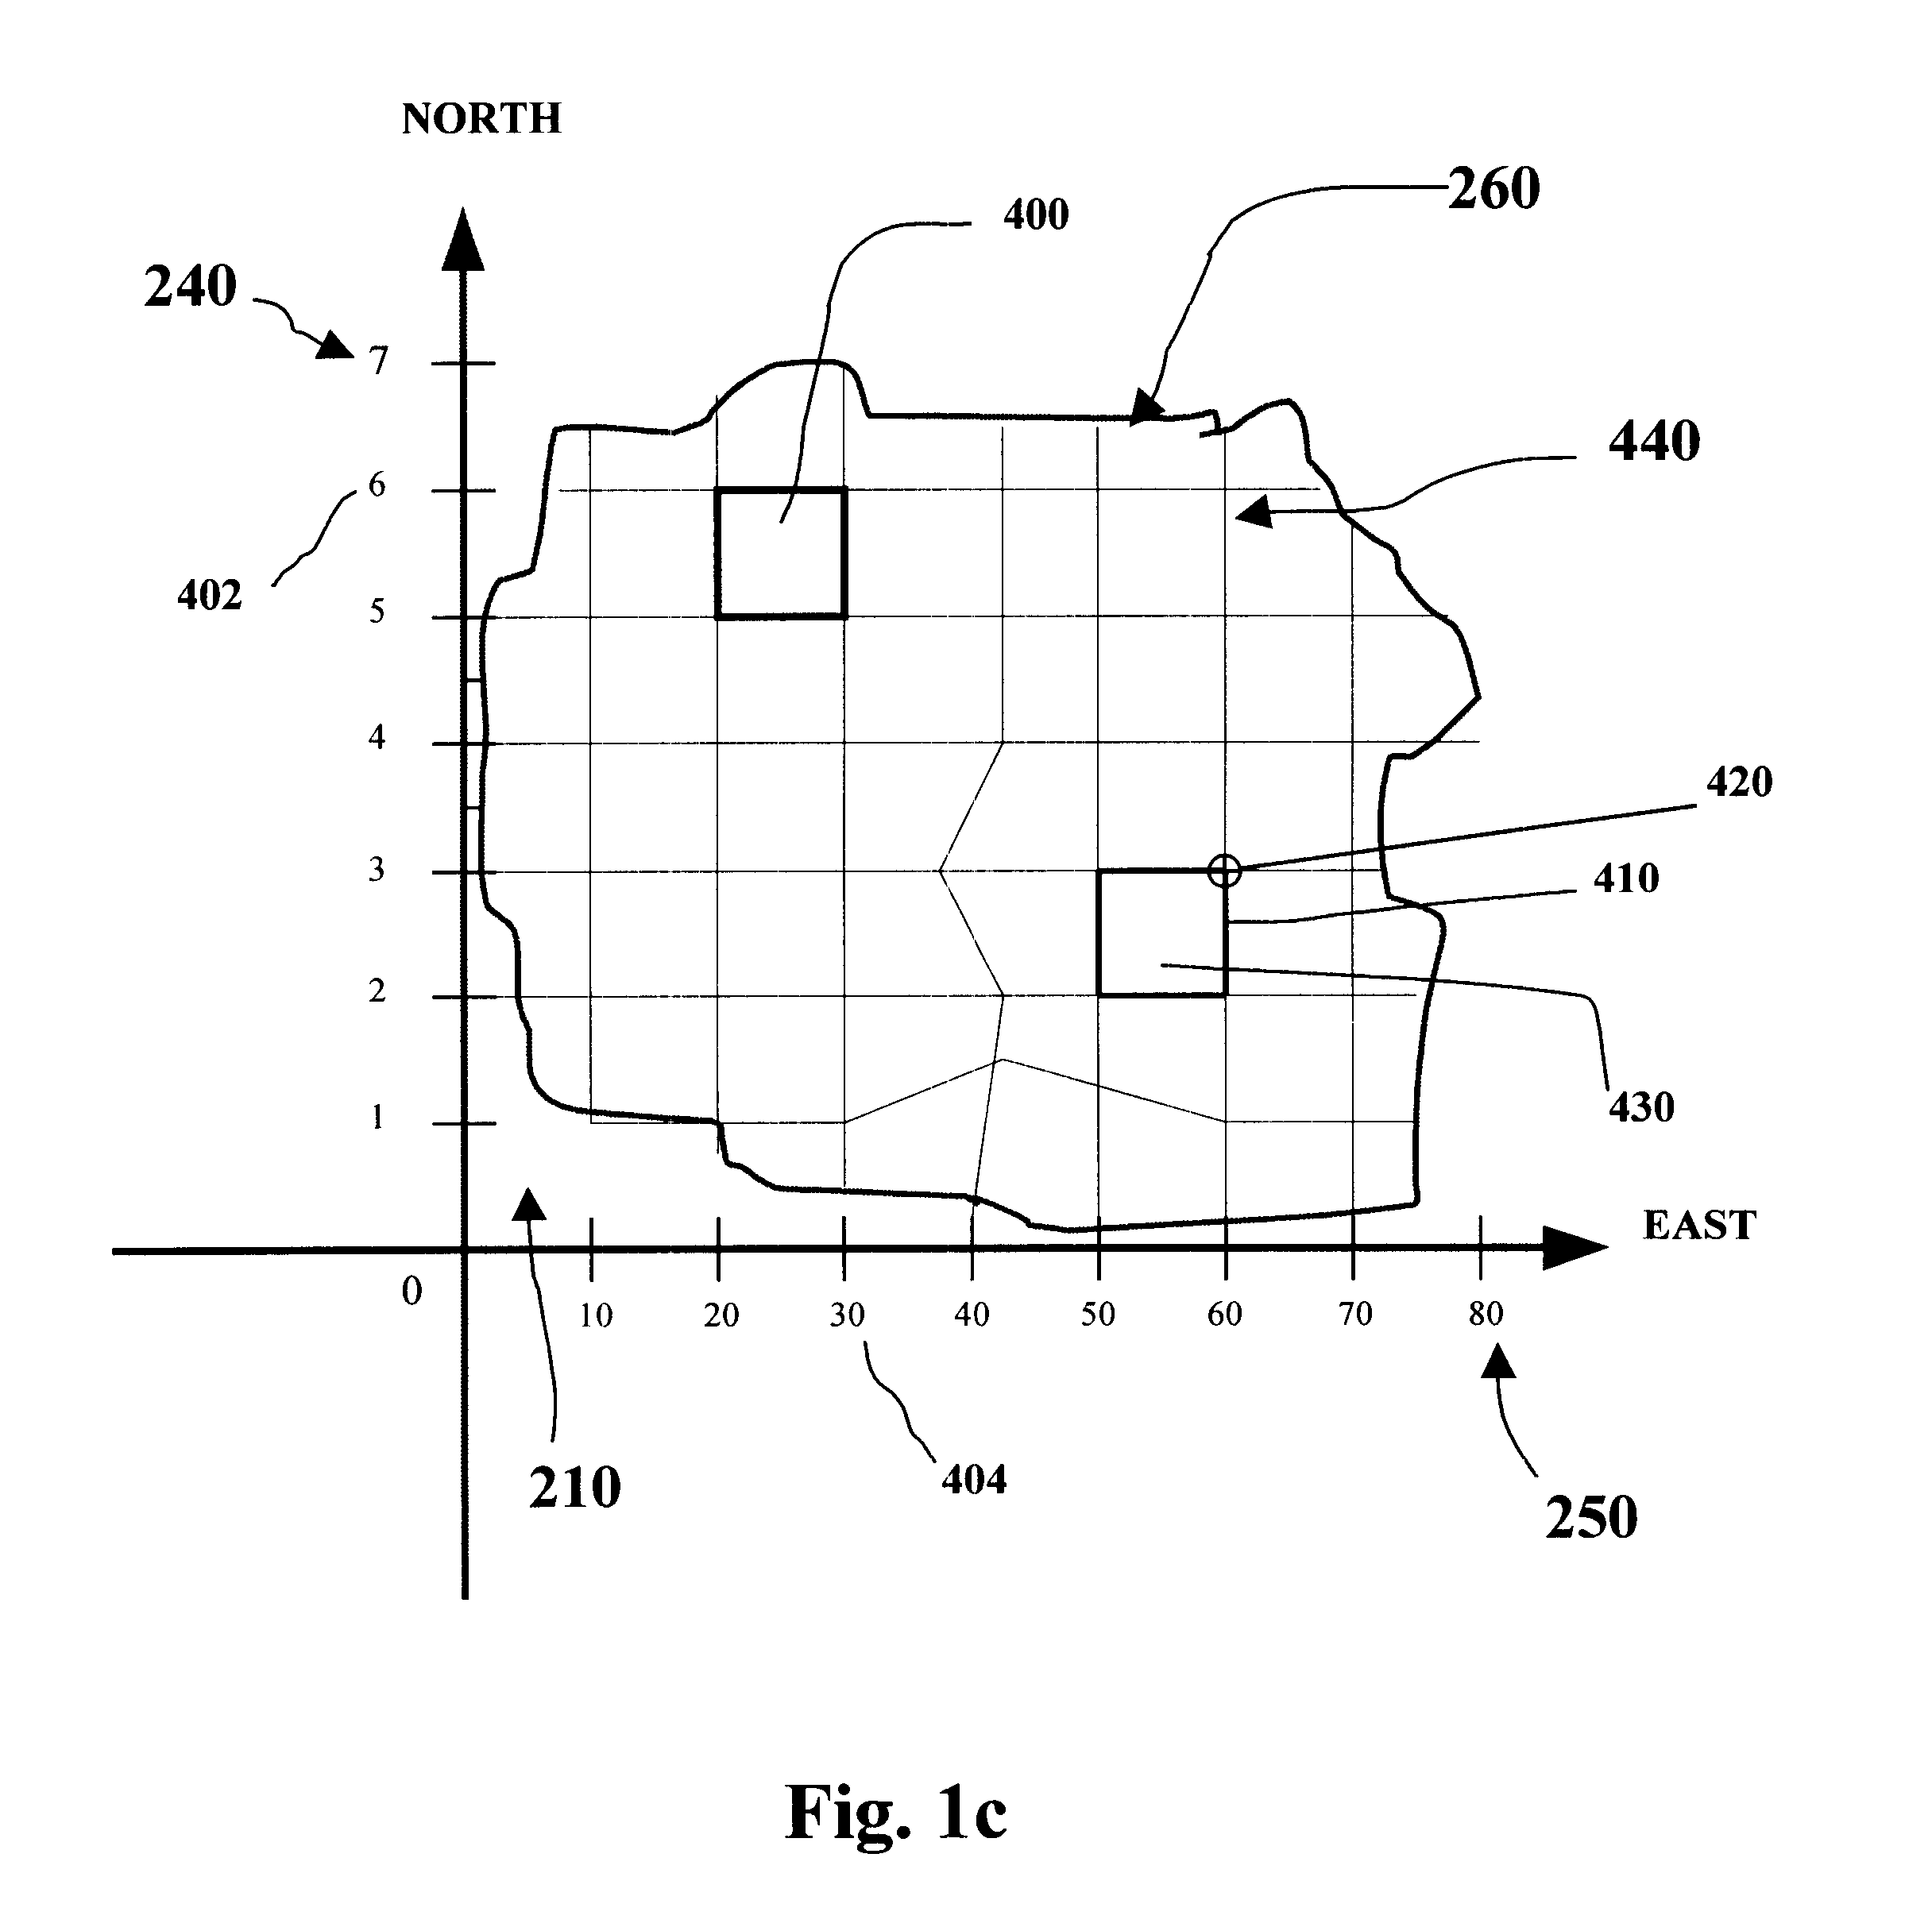 System and method for defining and creating surrogate addresses for township and range quarter sections